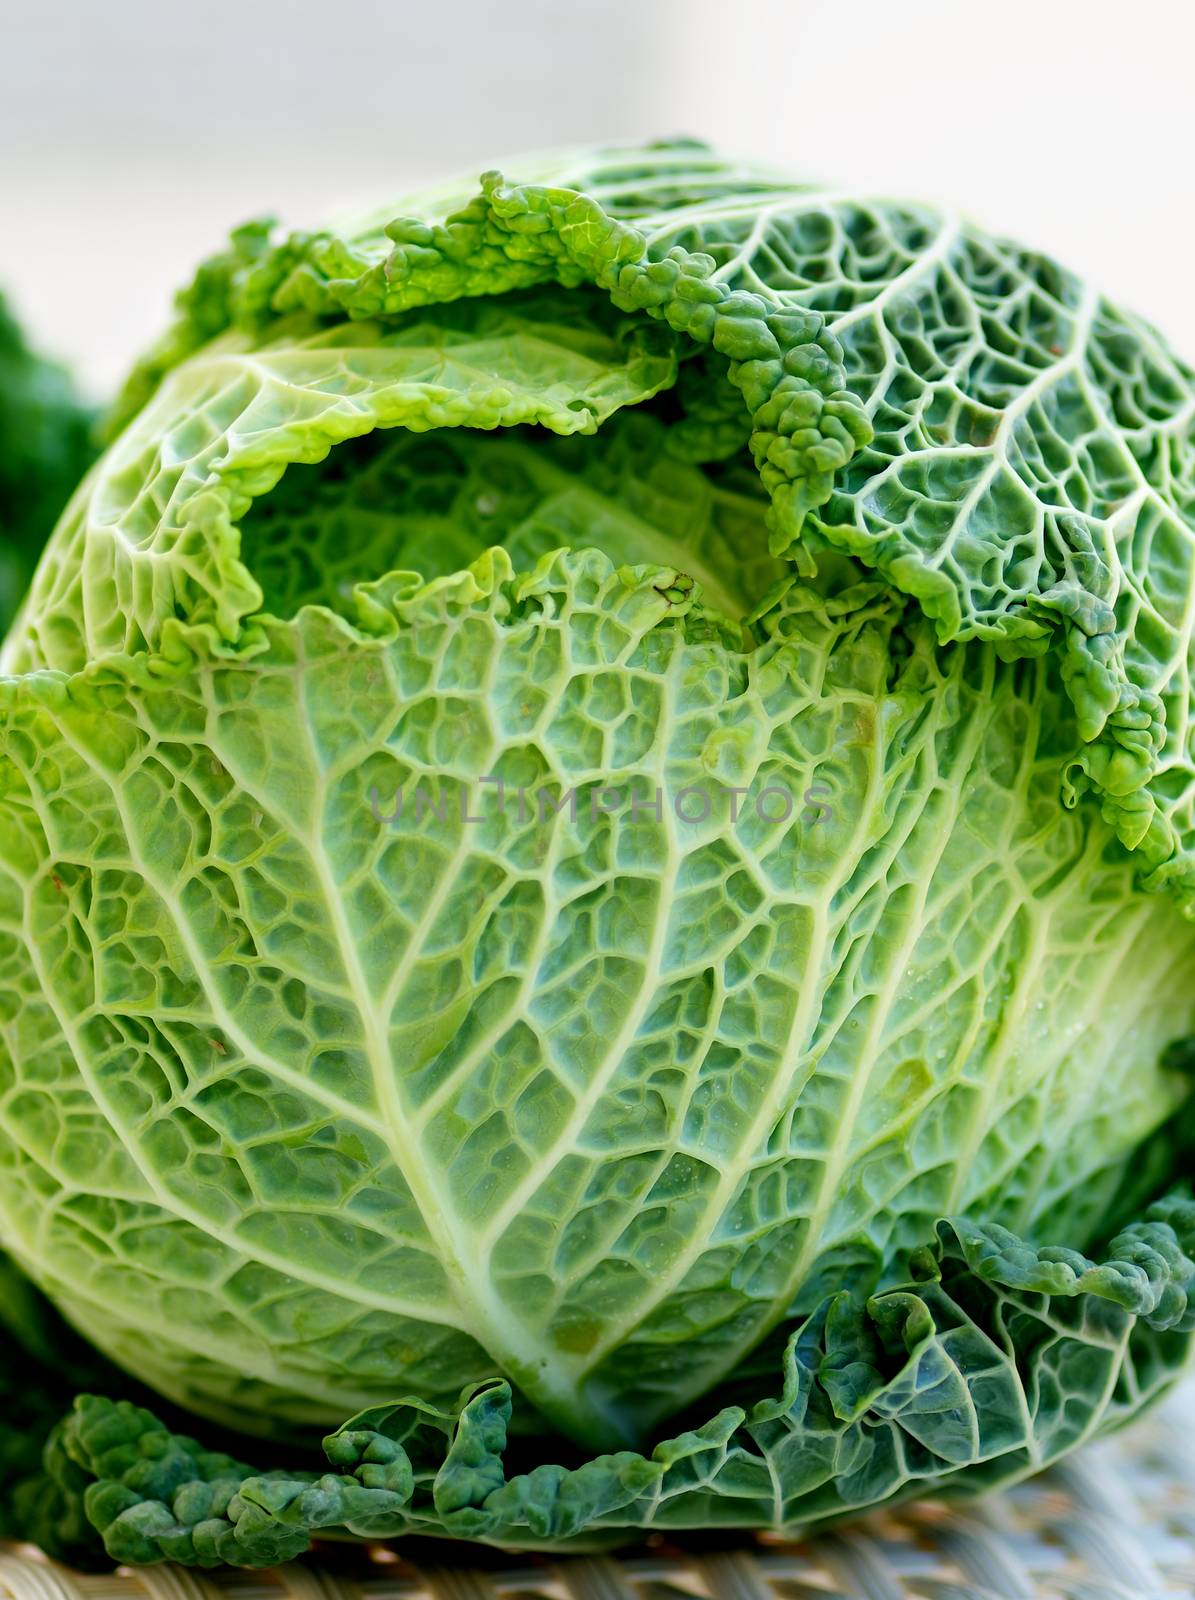 Green Leafy Texture Head of Savoy Cabbage closeup on Blurred background